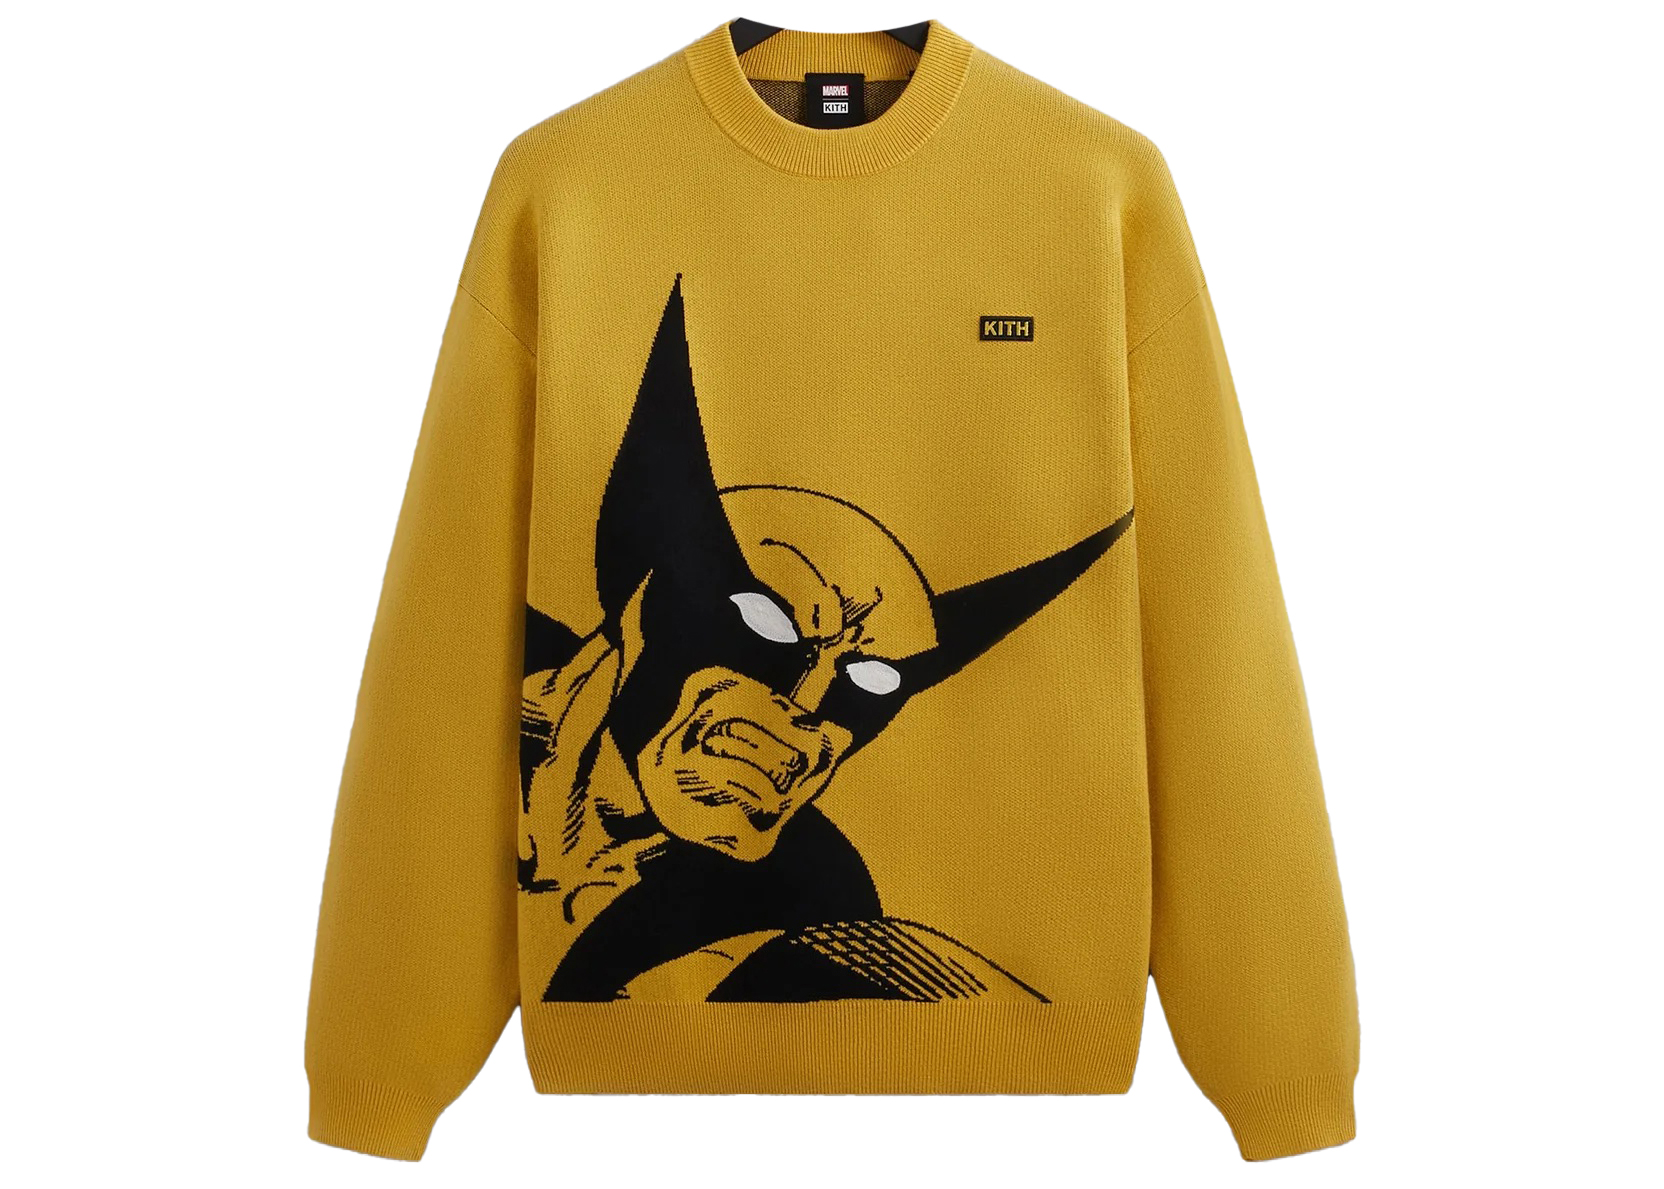 Marvel | Kith for X-Men Wolverine Tee XL新品未使用 - Tシャツ ...